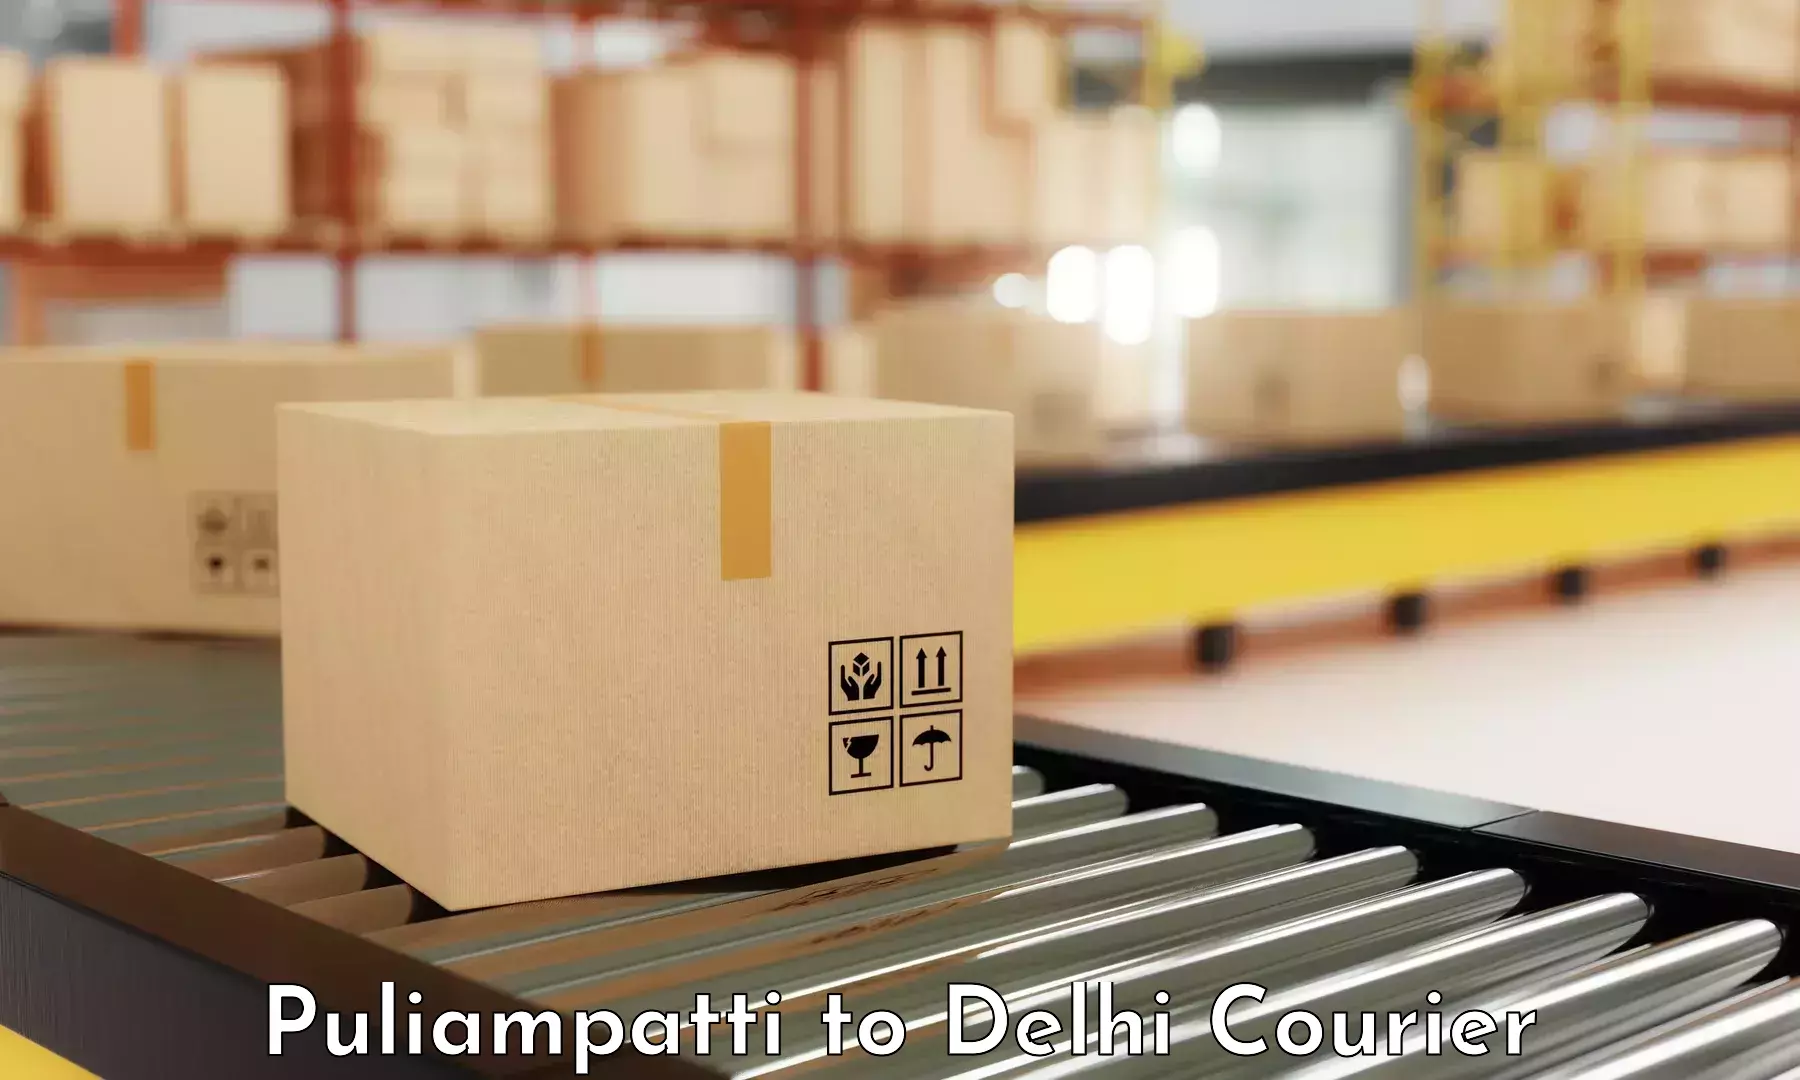 Next-day delivery options Puliampatti to Delhi Technological University DTU